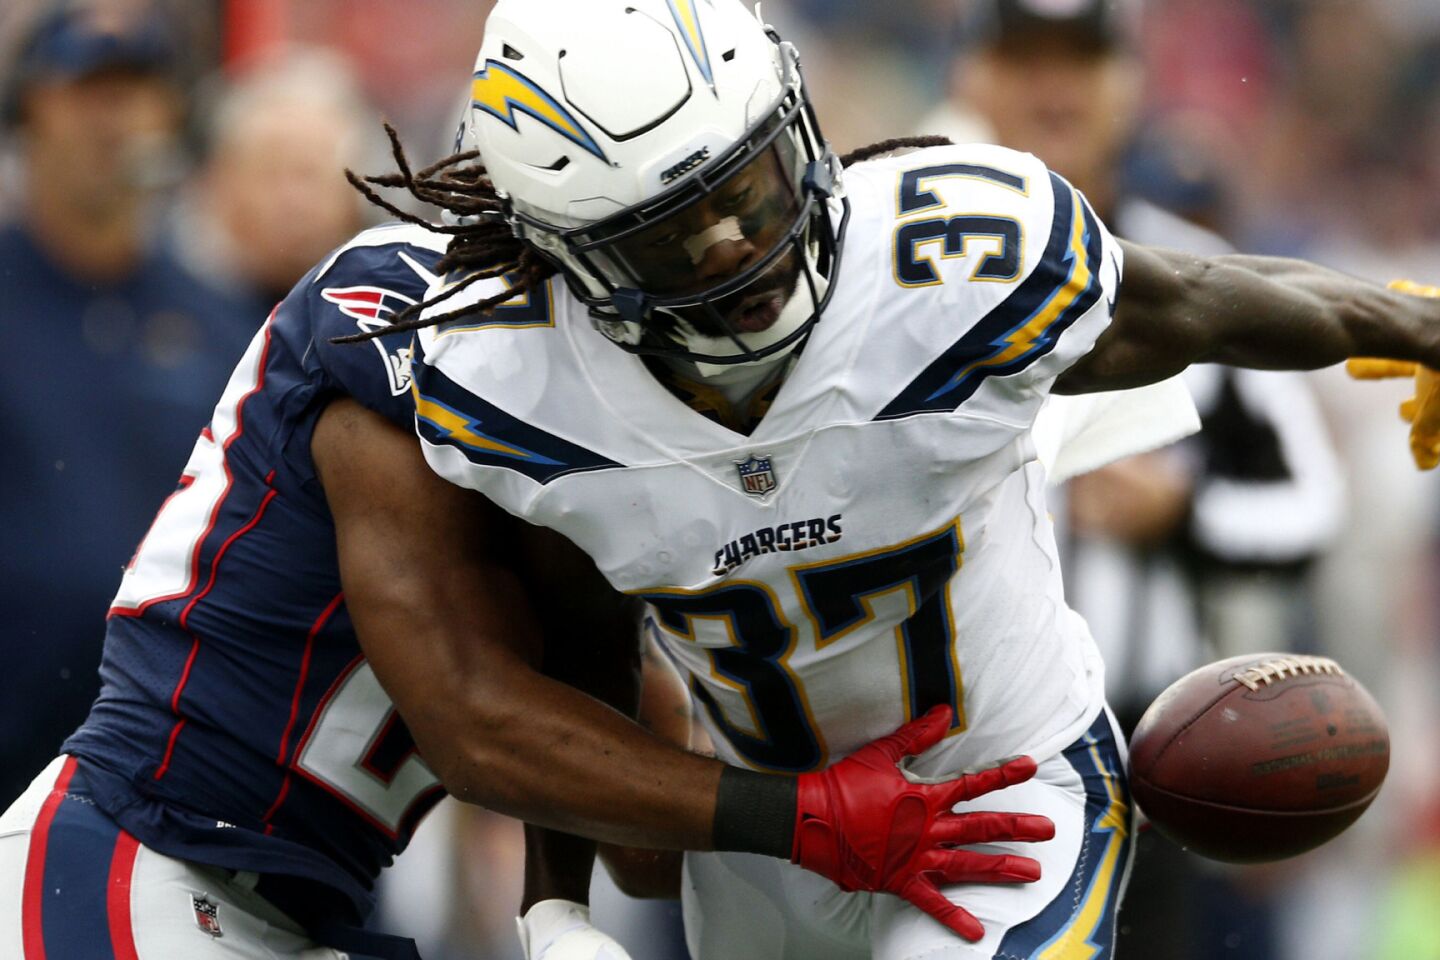 Chargers strong safety Jahleel Addae, right, interferes with a catch attempt by Patriots running back James White during the first half.